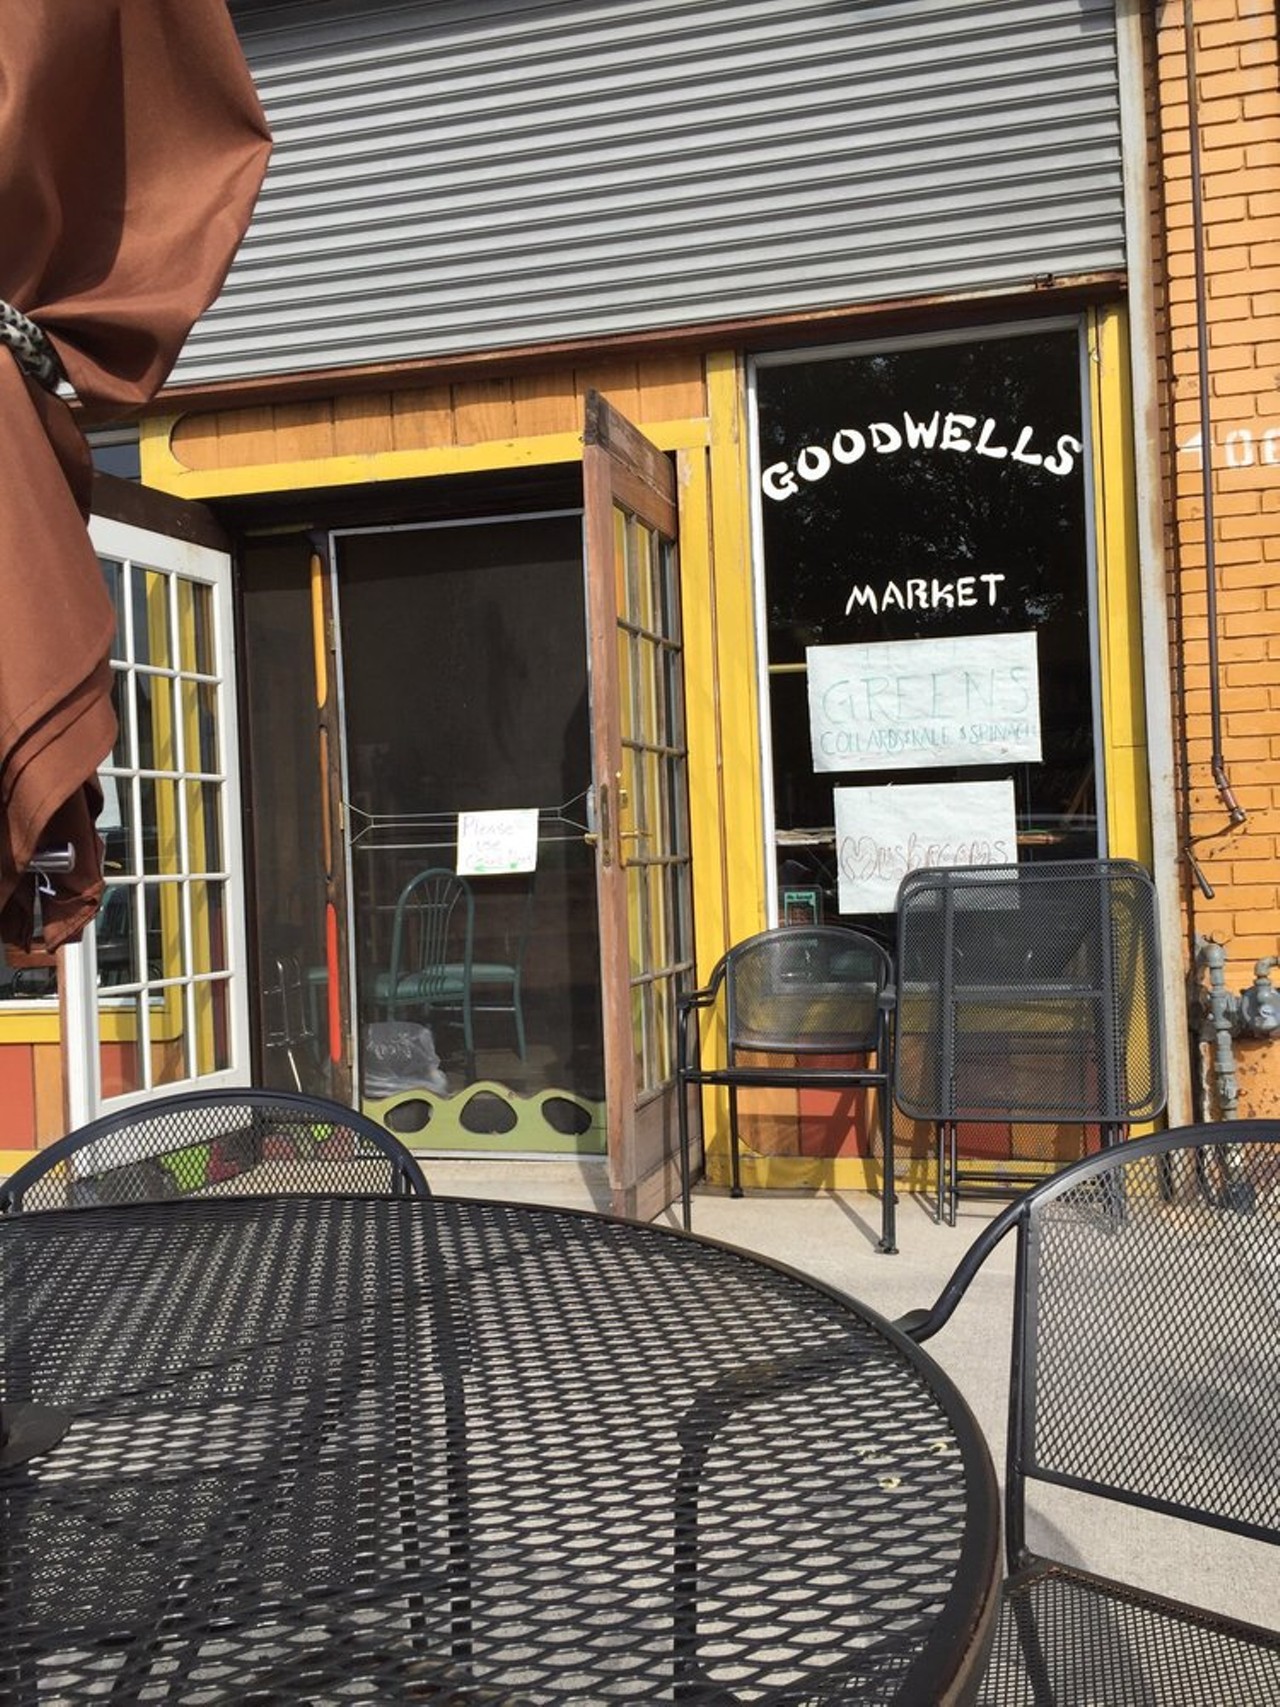 Goodwells Natural Food Market, 418 W Willis St Co-owner Jason Wood is a pioneer in reinvigorating the Cass Corridor into what it is today, thanks to the all-natural groceries and house-made veggie-friendly sandwiches, juices, and tostadas. (Photo by Yelp user Lynn S.)